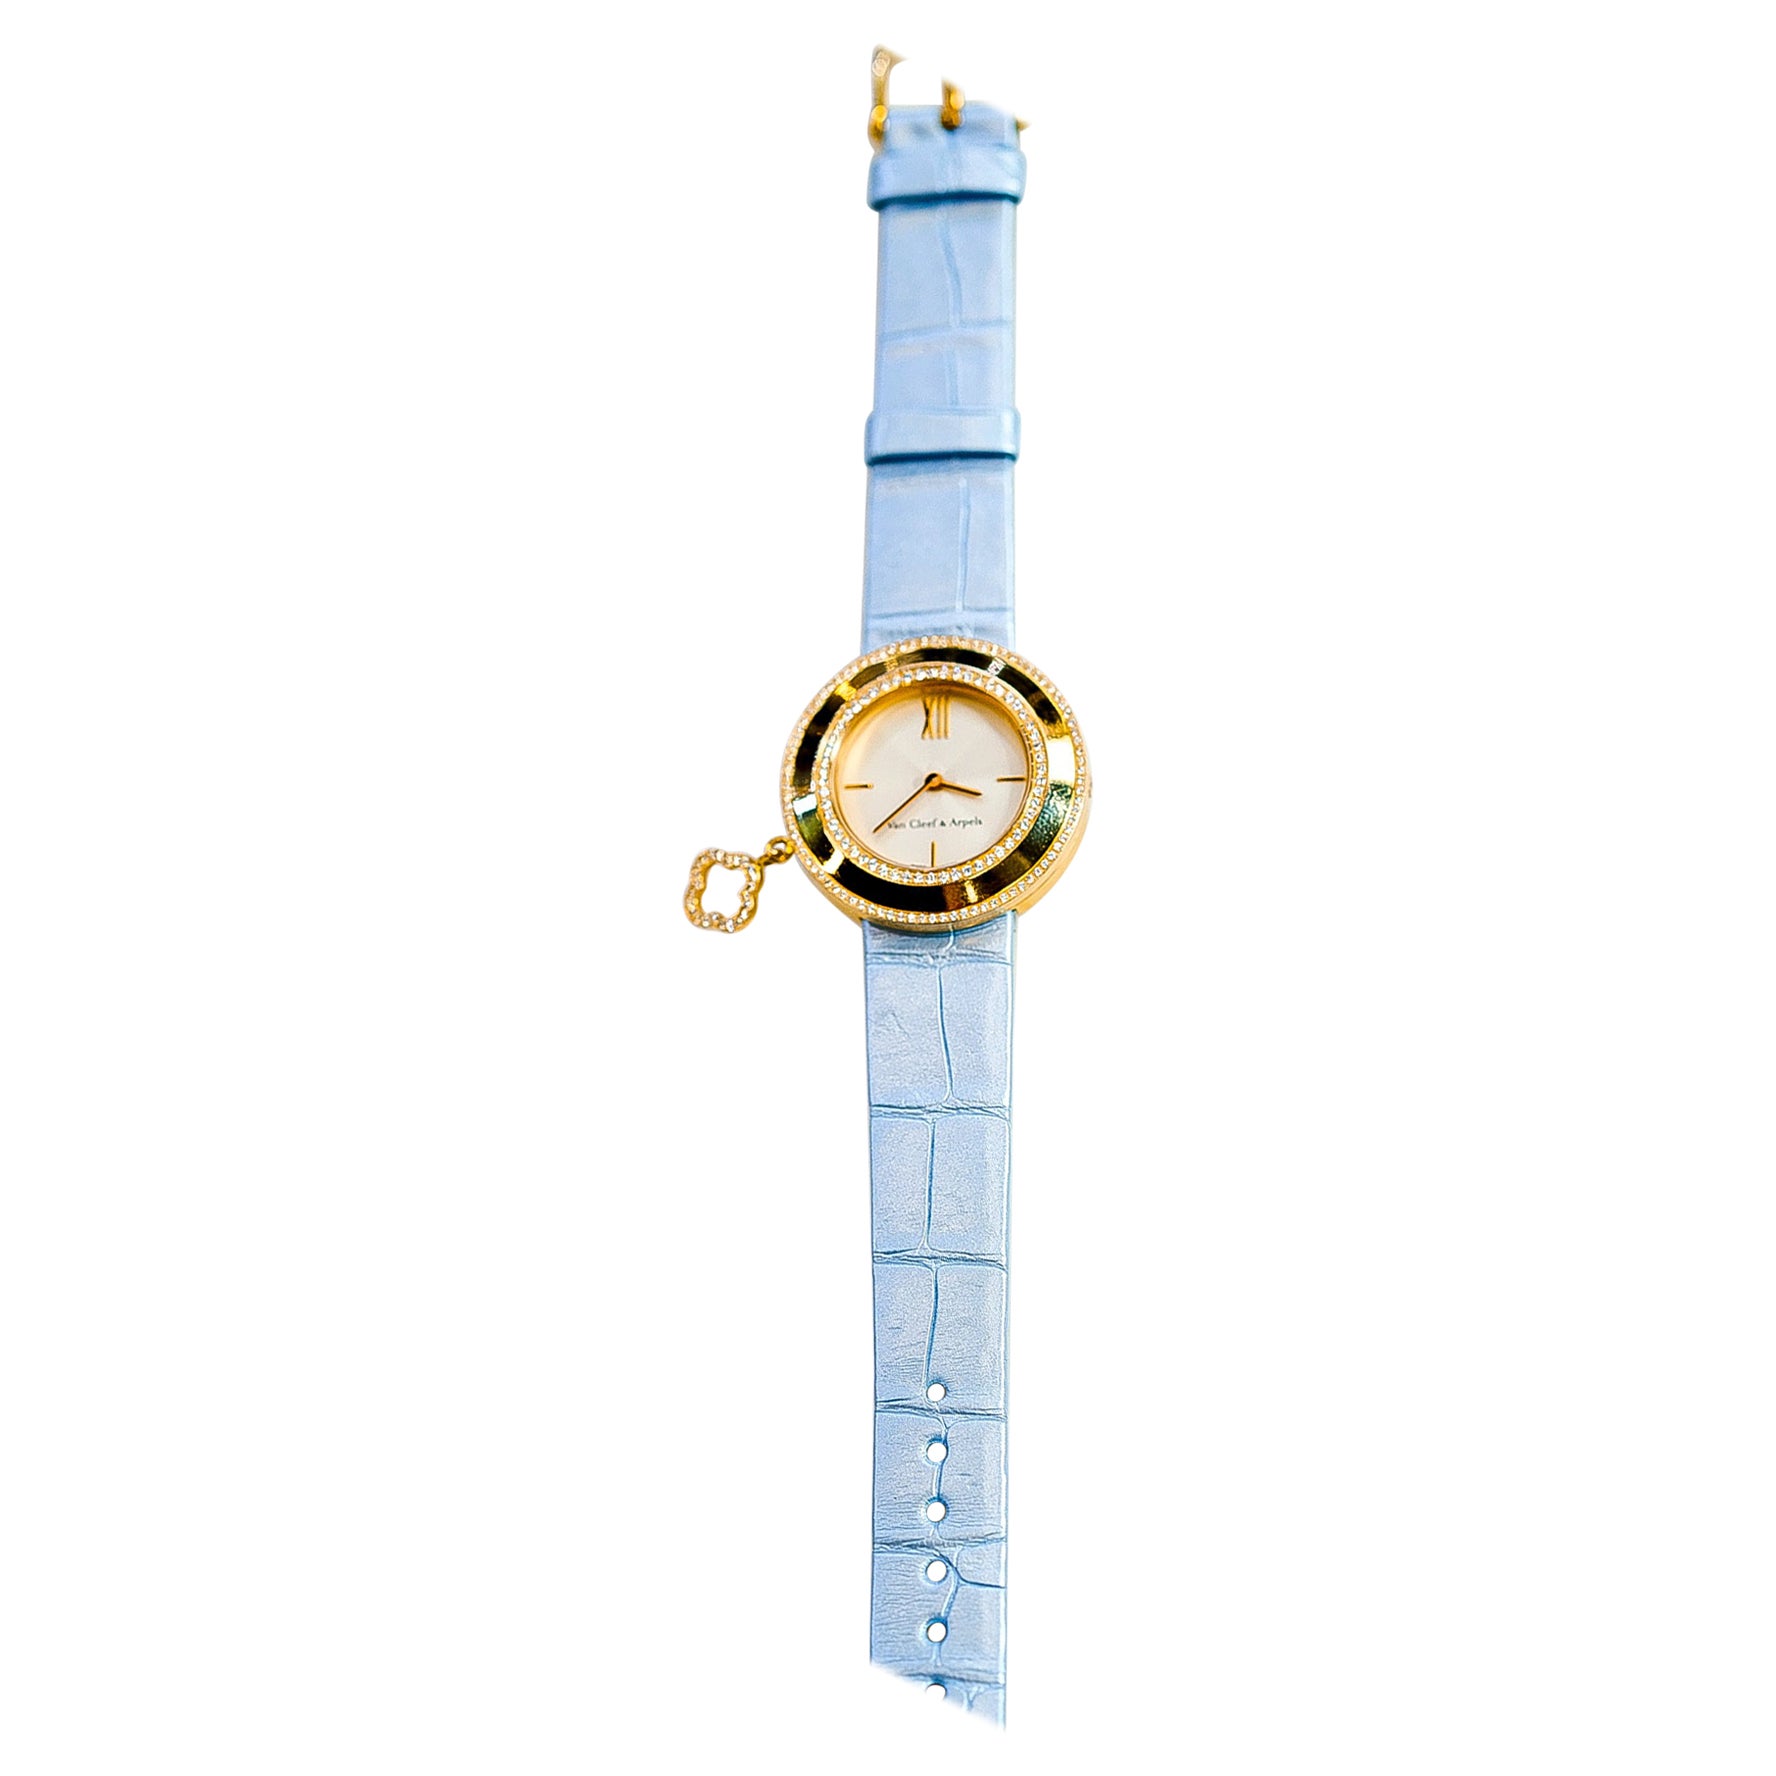 Van Cleef & Arpels 18K Yellow Gold Diamond Charm and Blue Alligator Watch.

The epitome of luxury with this stunning VCA charm watch, a true marvel of craftsmanship and elegance. 

Meticulously crafted from 18 karat gold, this timepiece exudes a